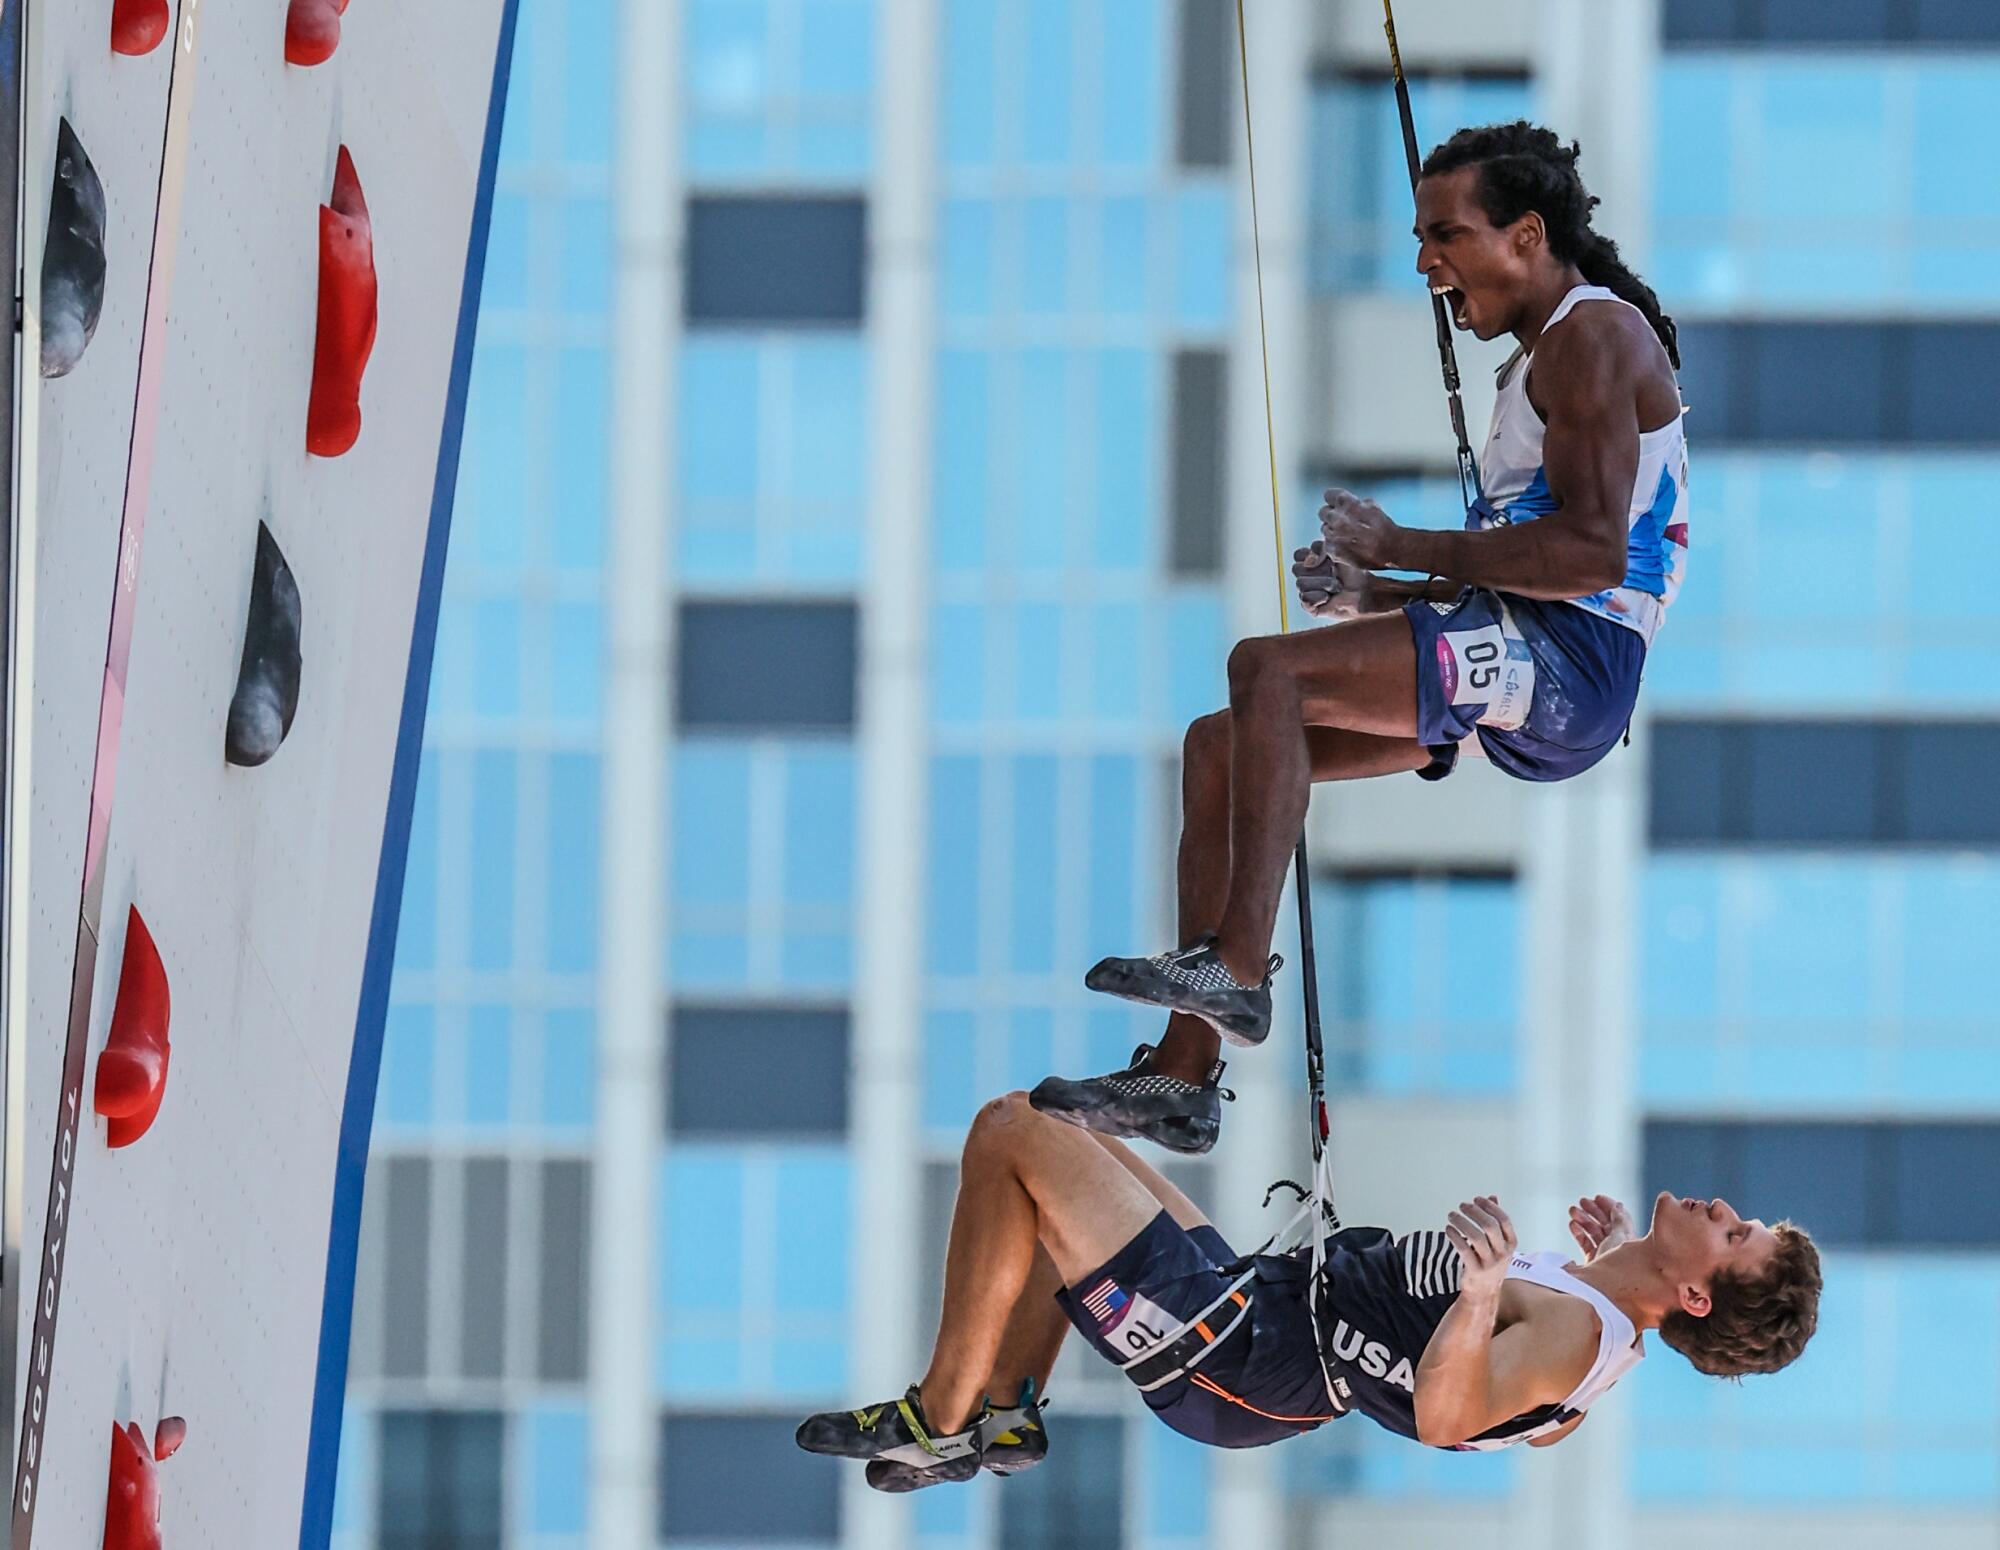 Mickael Mawem and Nathaniel Coleman are suspended by ropes next to a climbing wall.